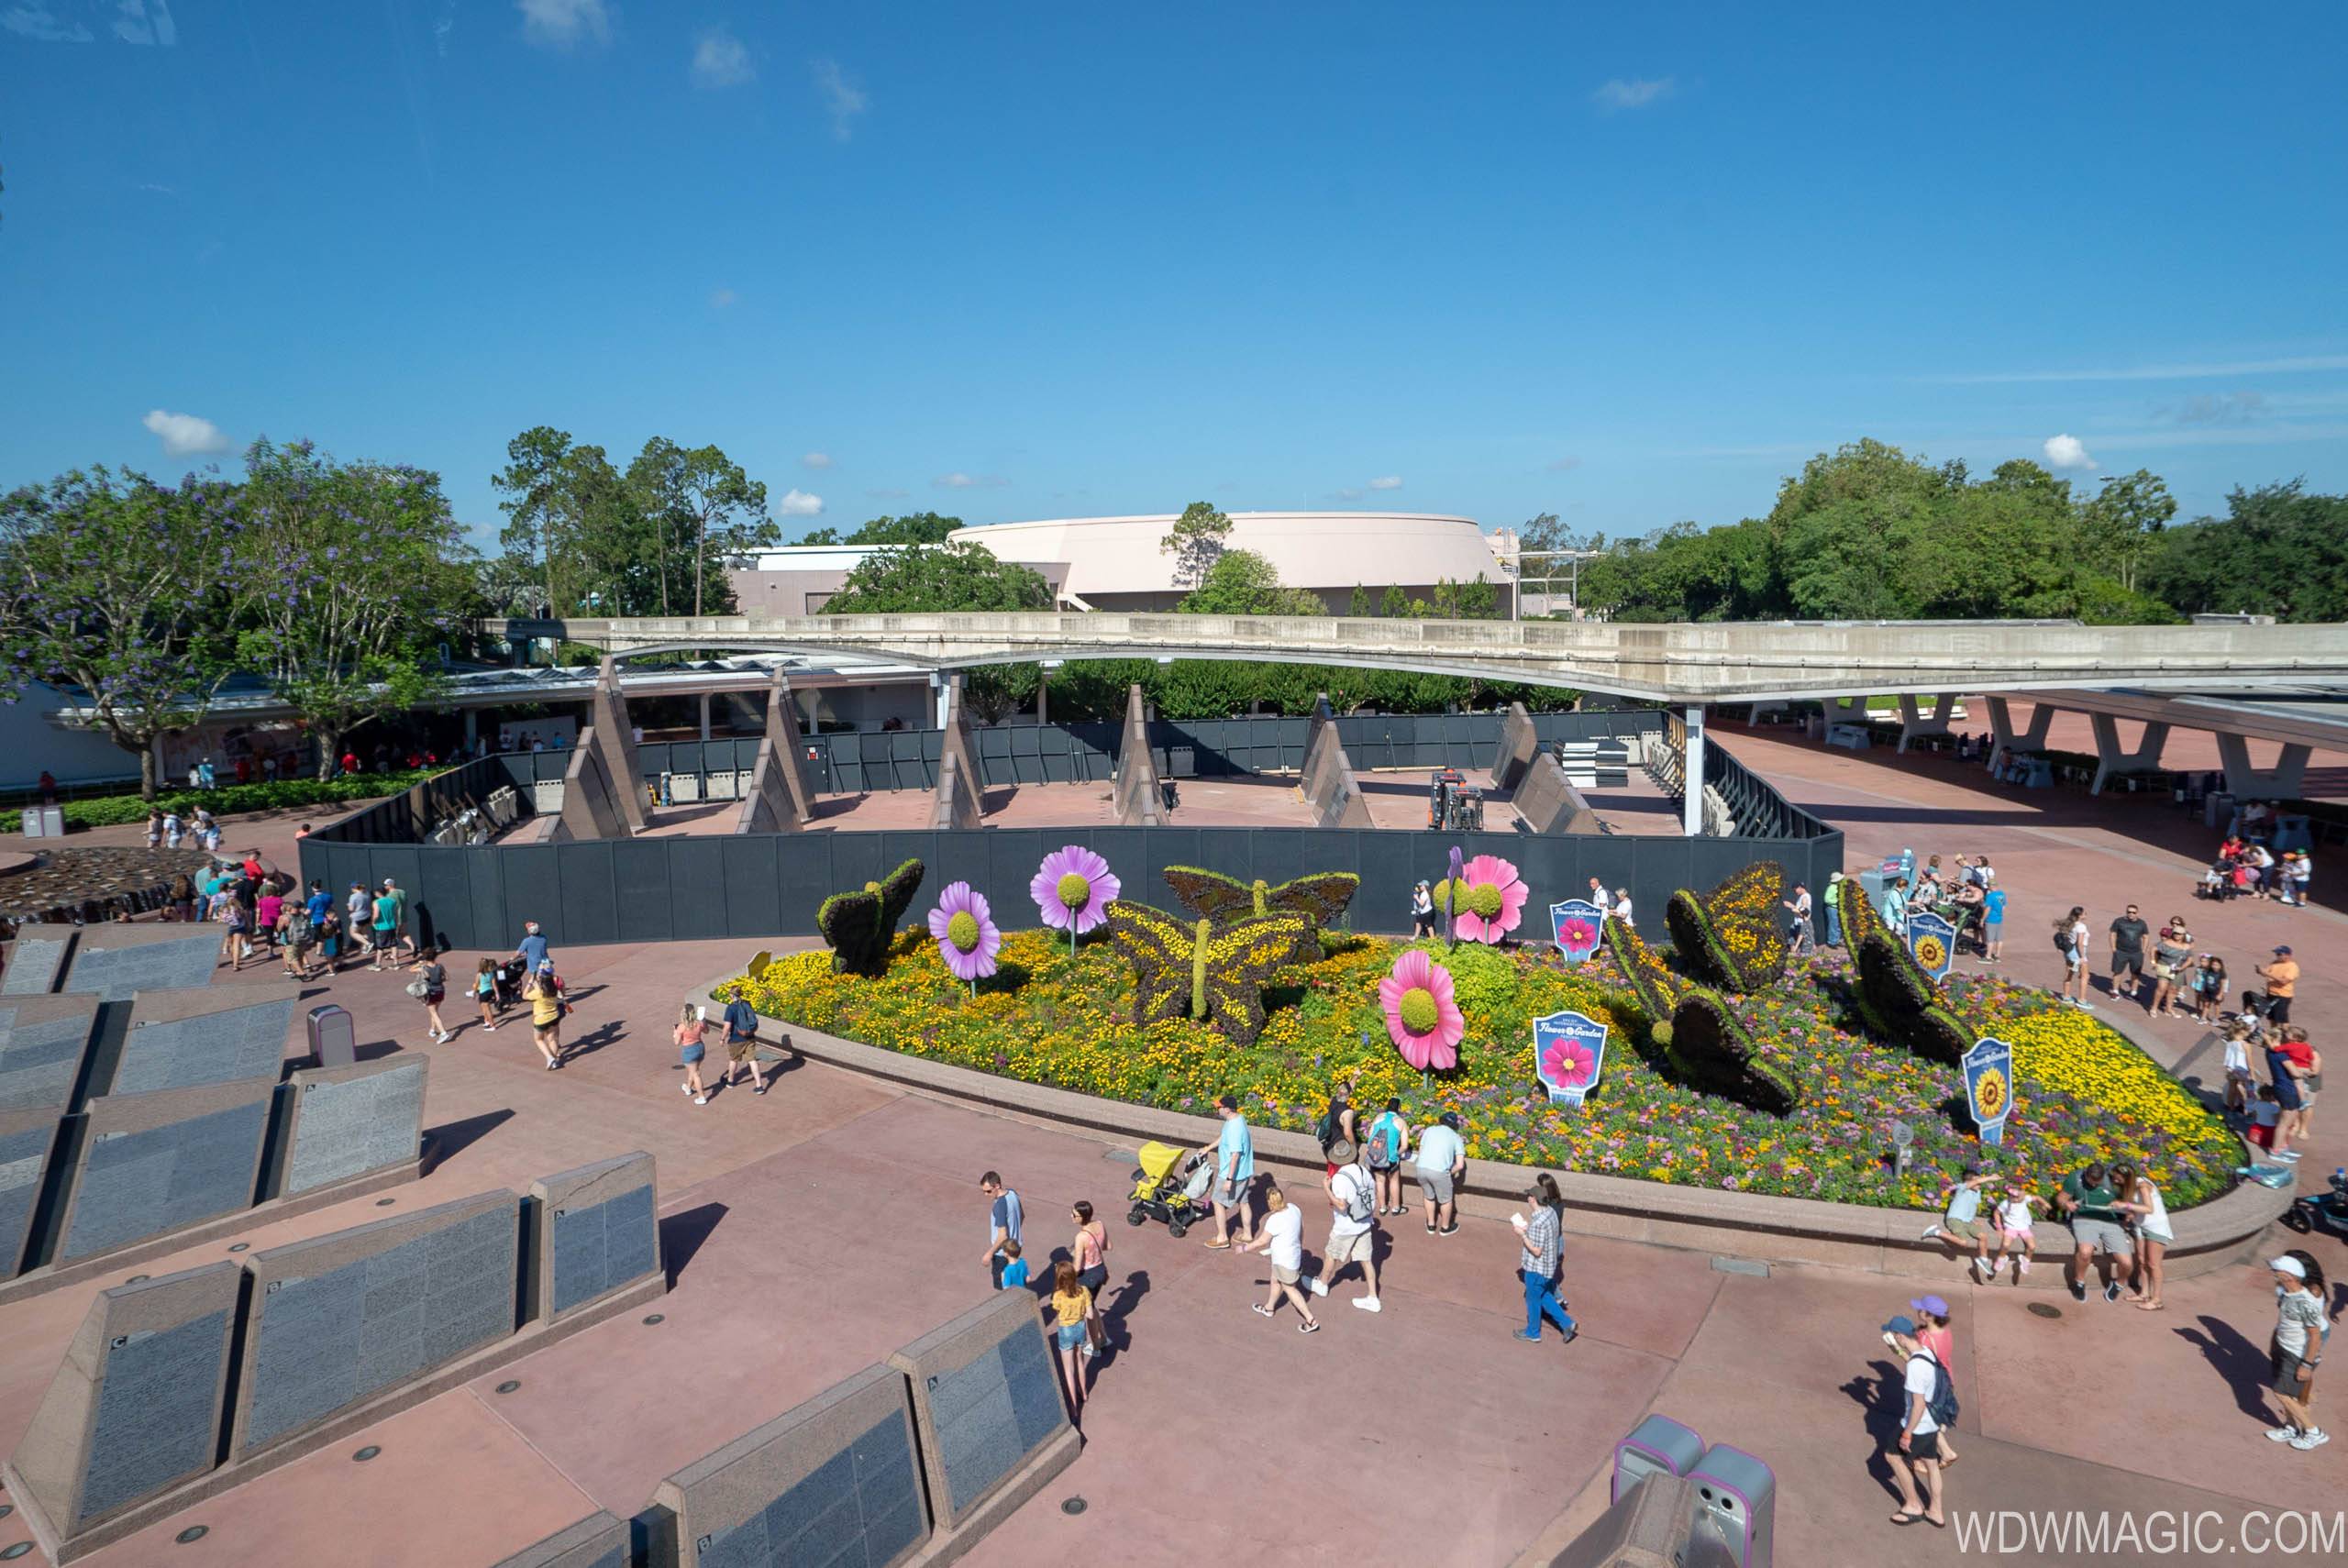 PHOTOS - Demolition walls up around Leave a Legacy at Epcot's main entrance